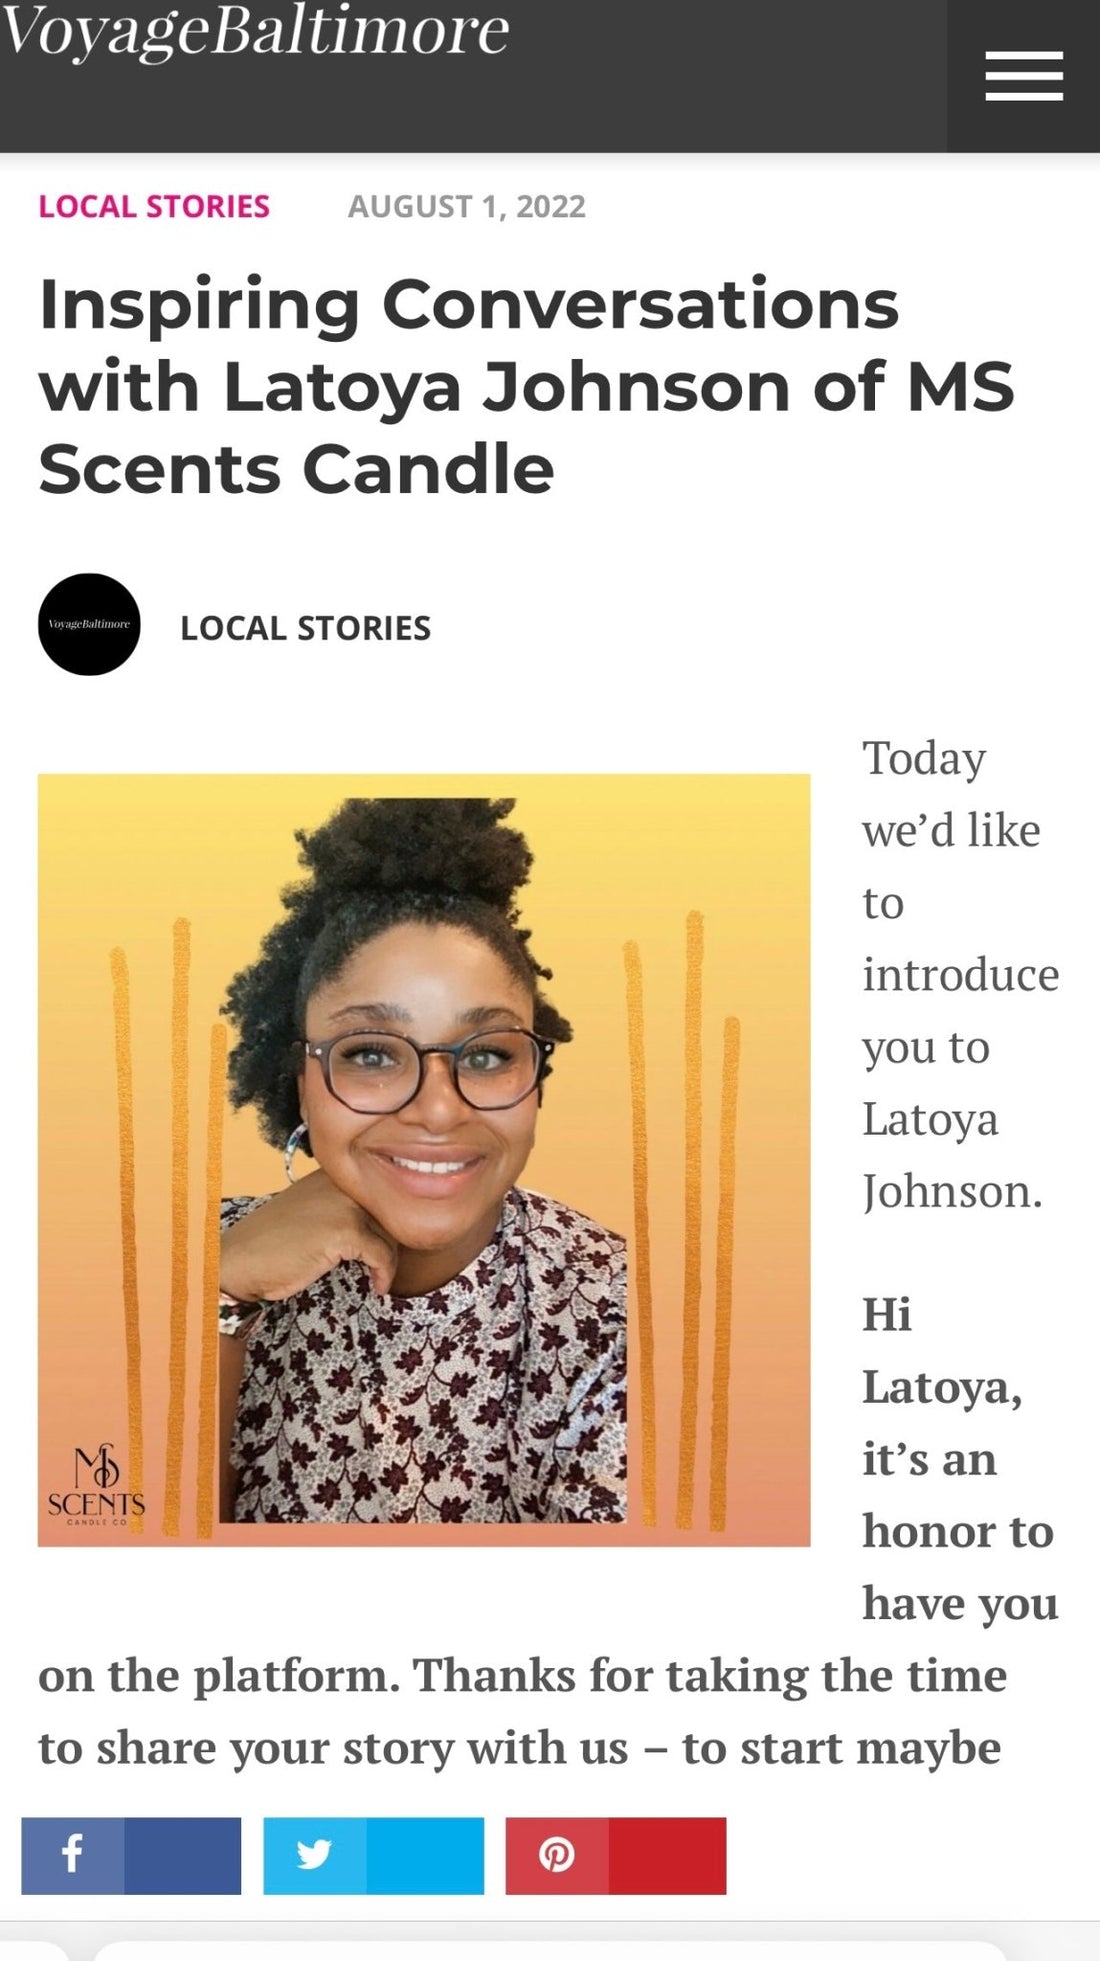 Interview with Voyage Baltimore Magazine - MS Scents Candle Co.